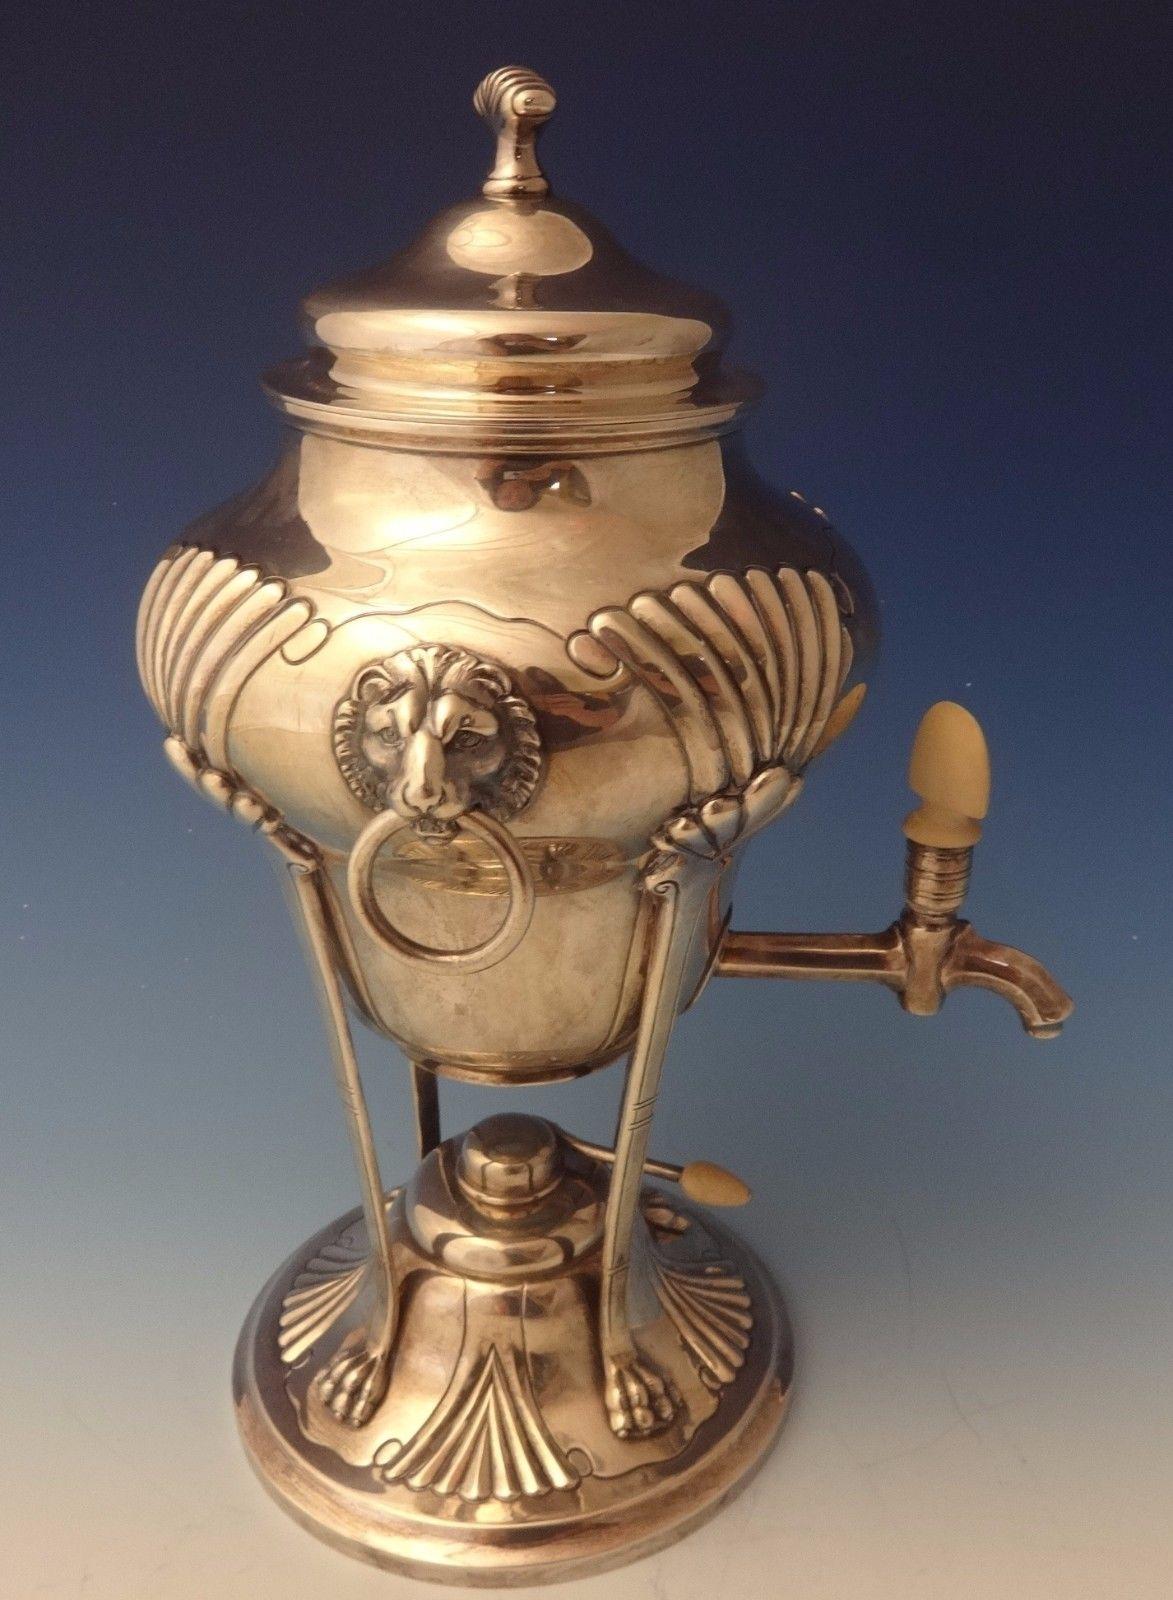 Onslow by Tuttle
This rare Onslow by Tuttle sterling hot water urn/samovar has superb applied 3-D lion heads and lion paws. The spigot and burner handle have finials. The piece has a DRD monogram, and it has the Harry Truman HT date mark. It dates